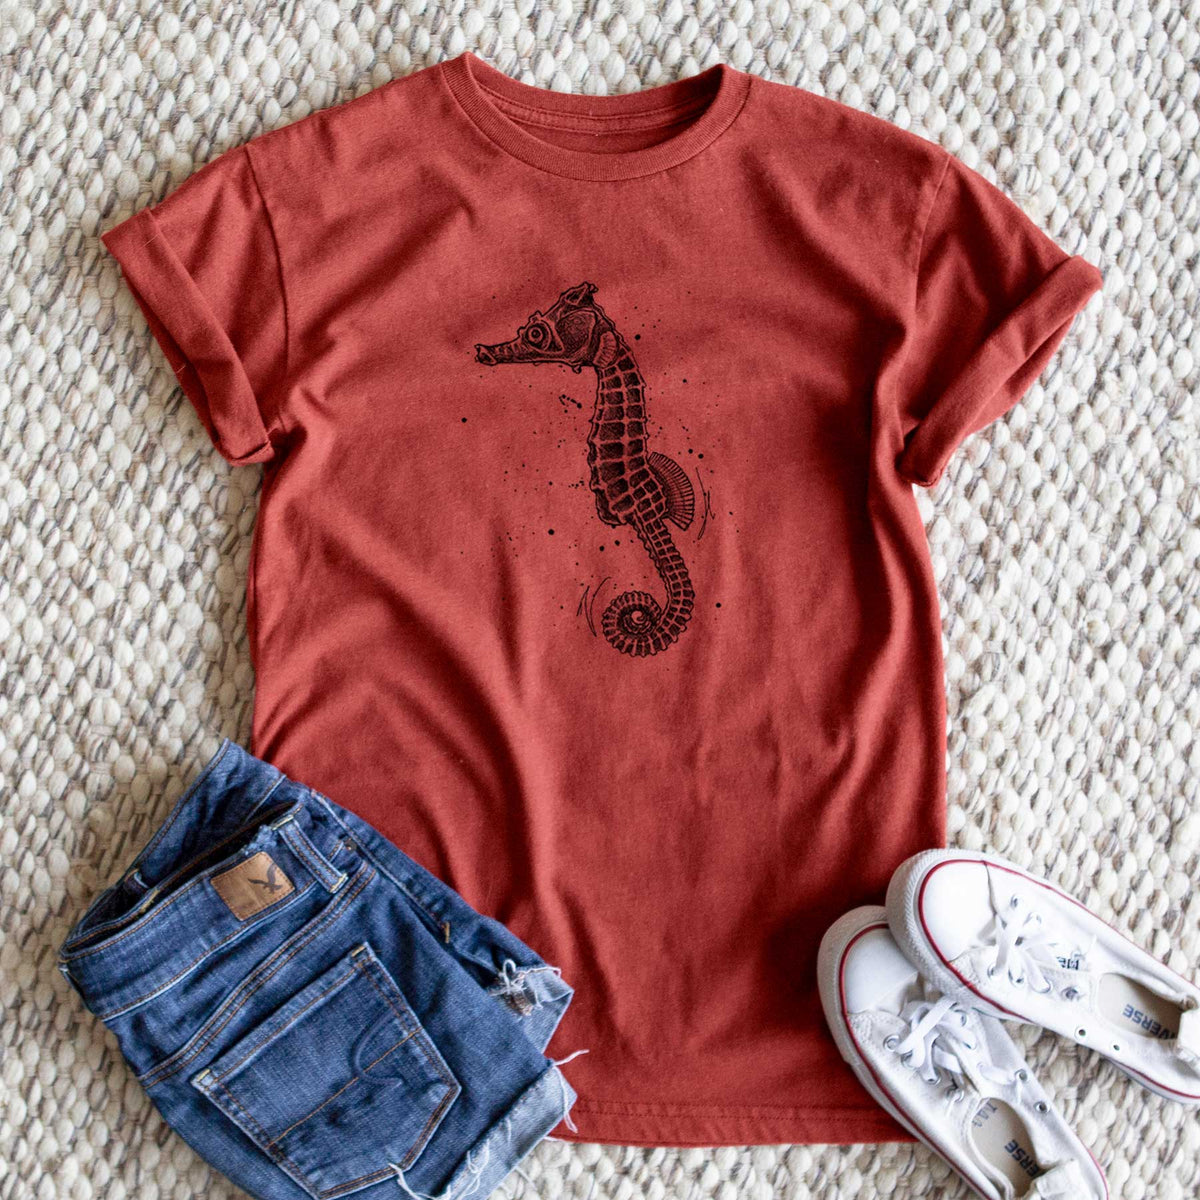 Hippocampus ingens - Pacific Seahorse - Unisex Recycled Eco Tee  - CLOSEOUT - FINAL SALE